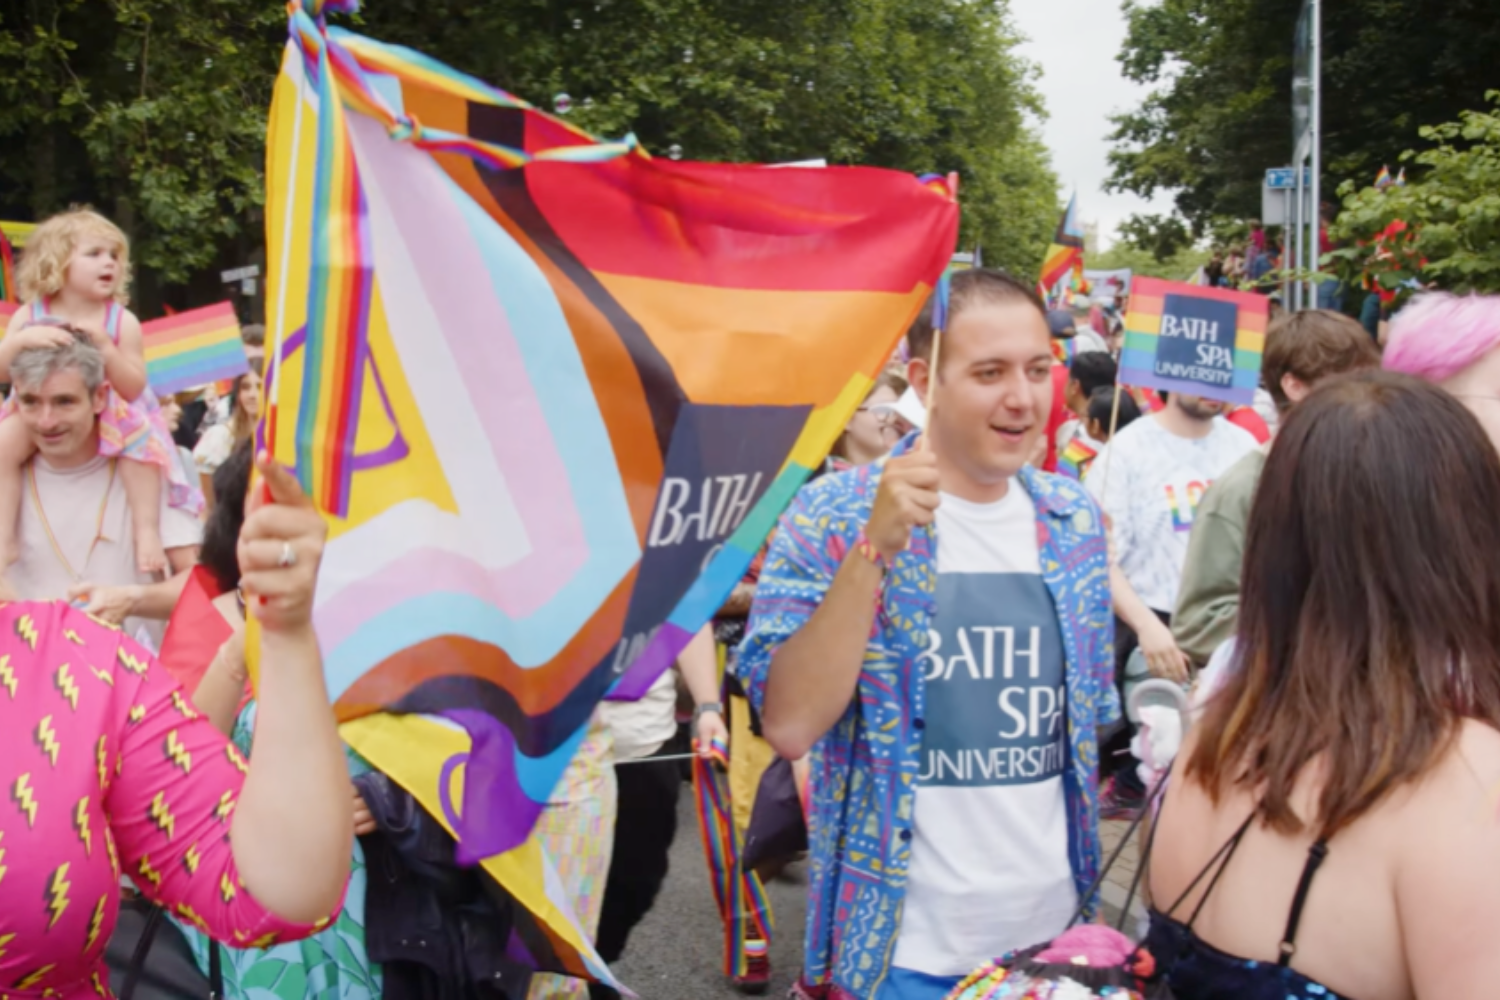 A group of Bath Spa staff and students march in the Bristol Pride parade.